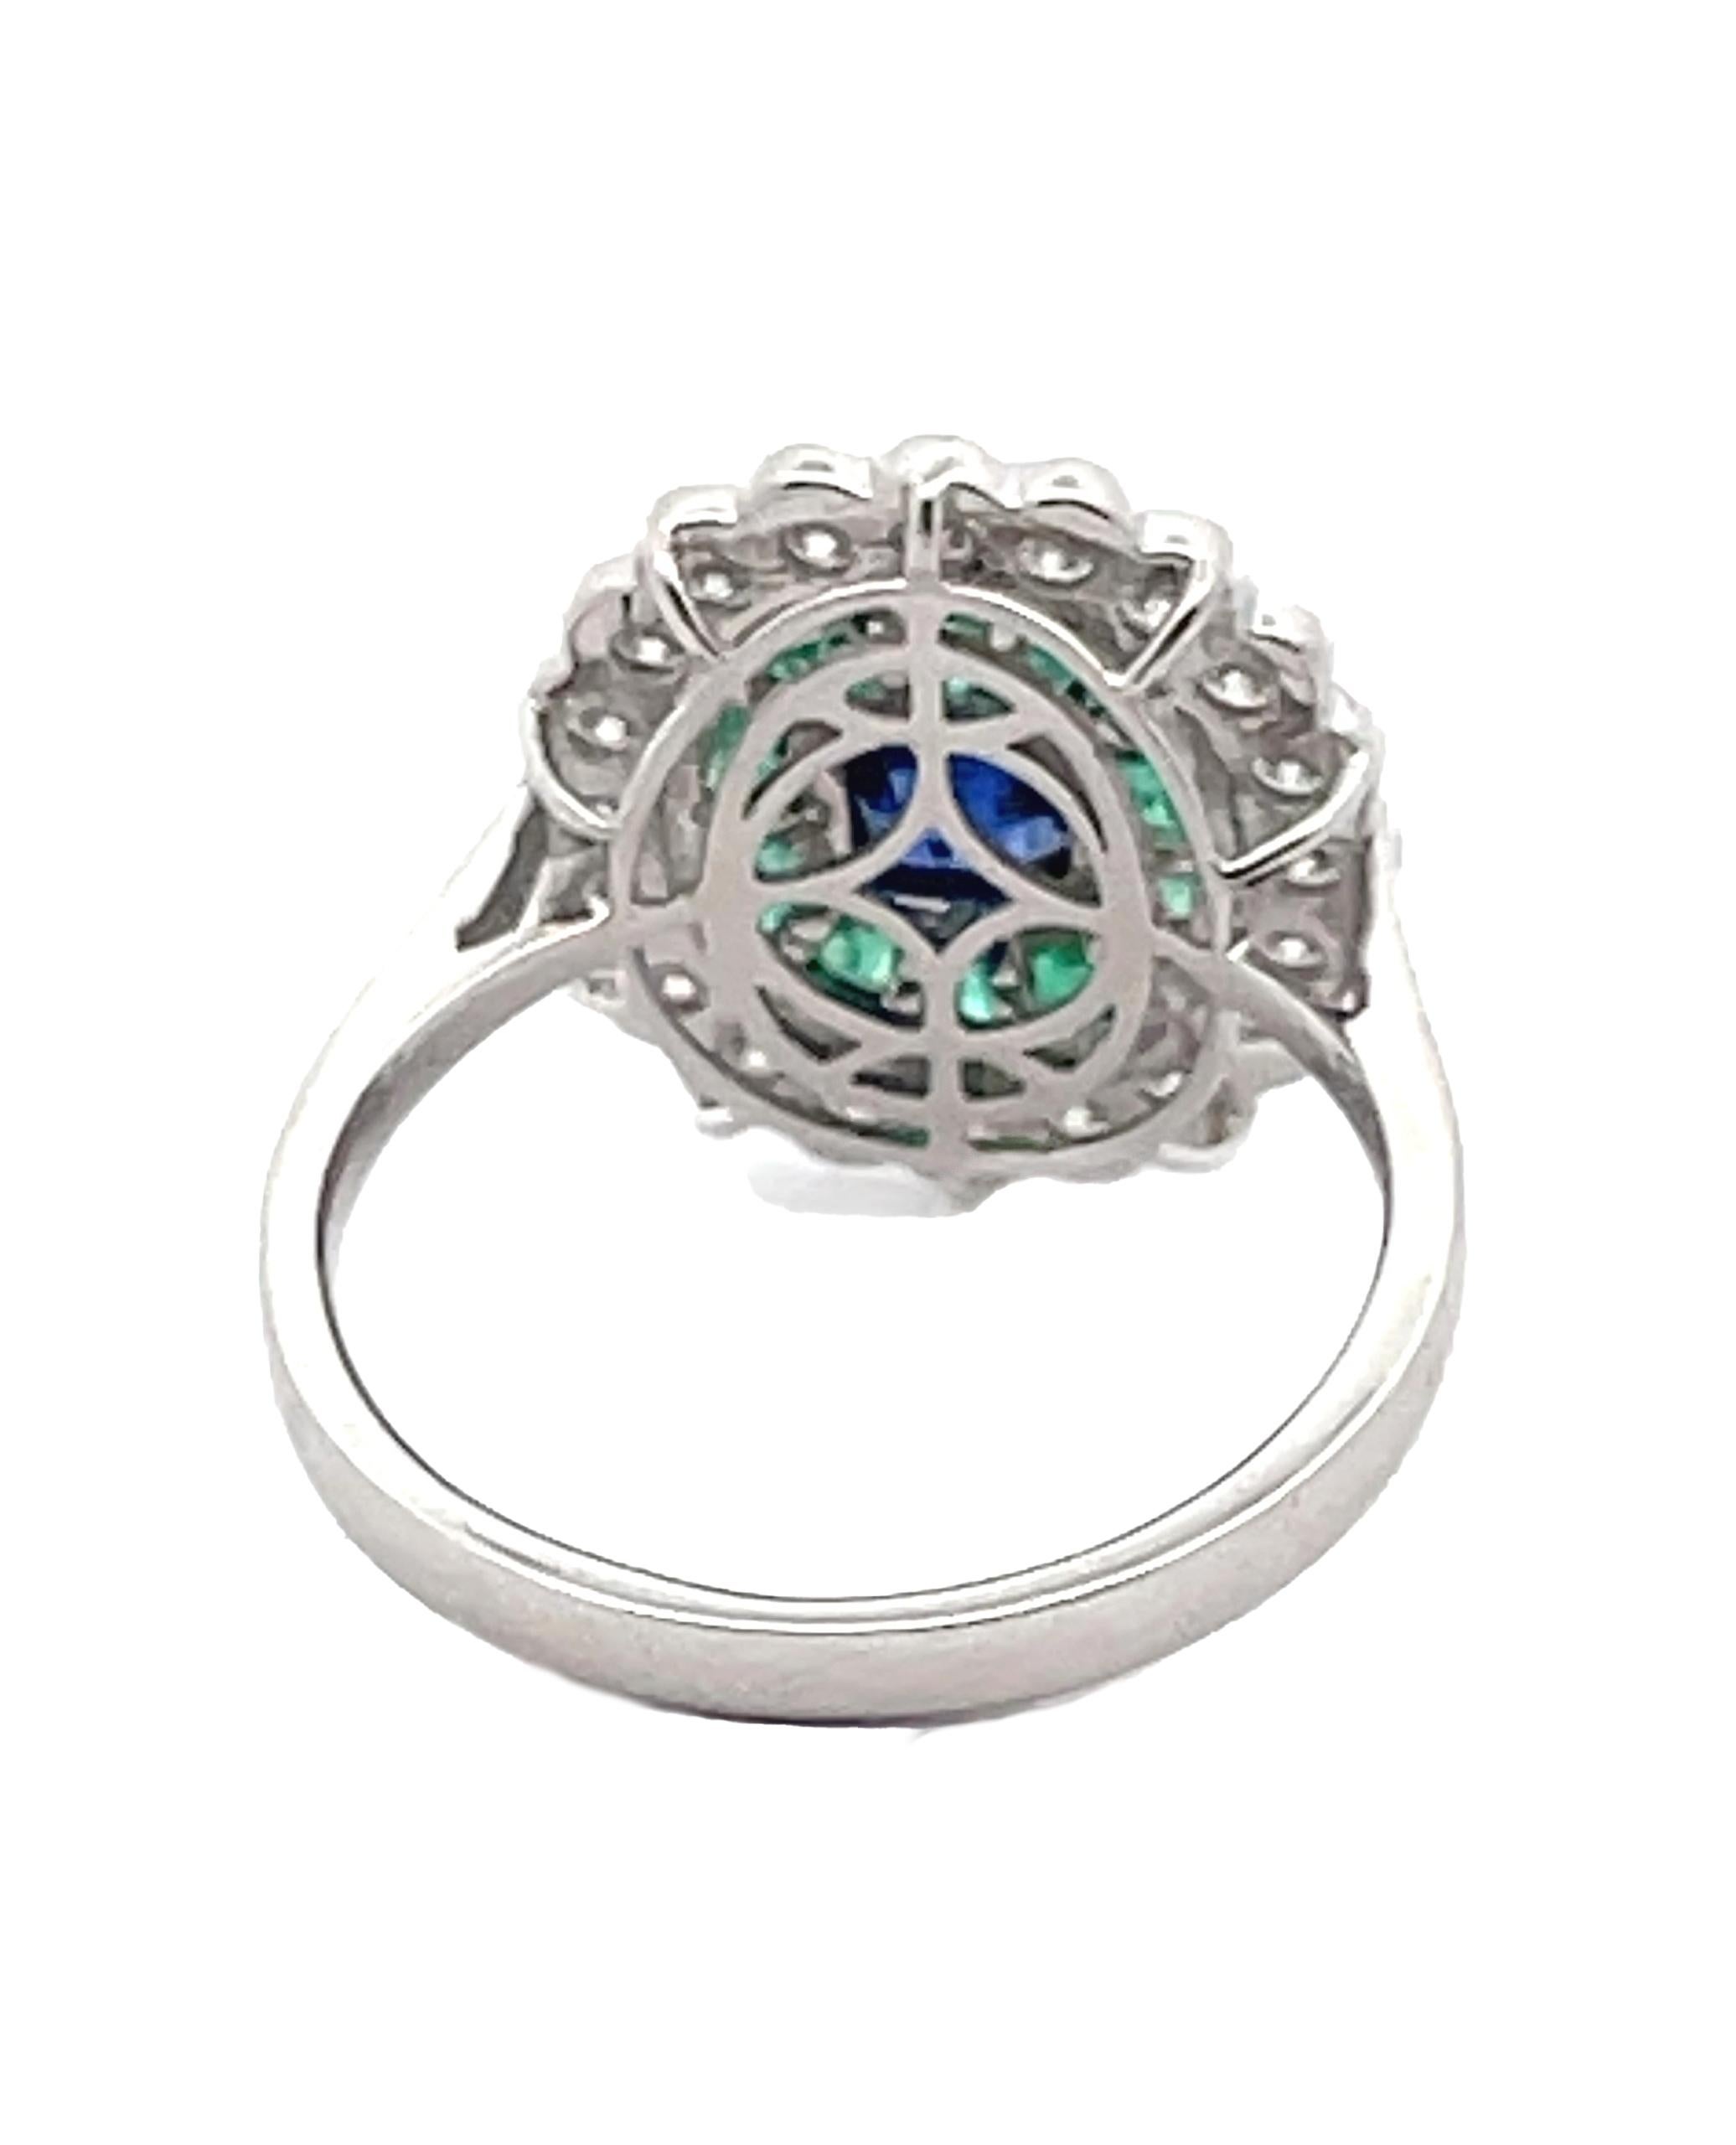 Cushion Cut Modern Vintage Inspired 18K White Gold Emerald and Sapphire Ring For Sale